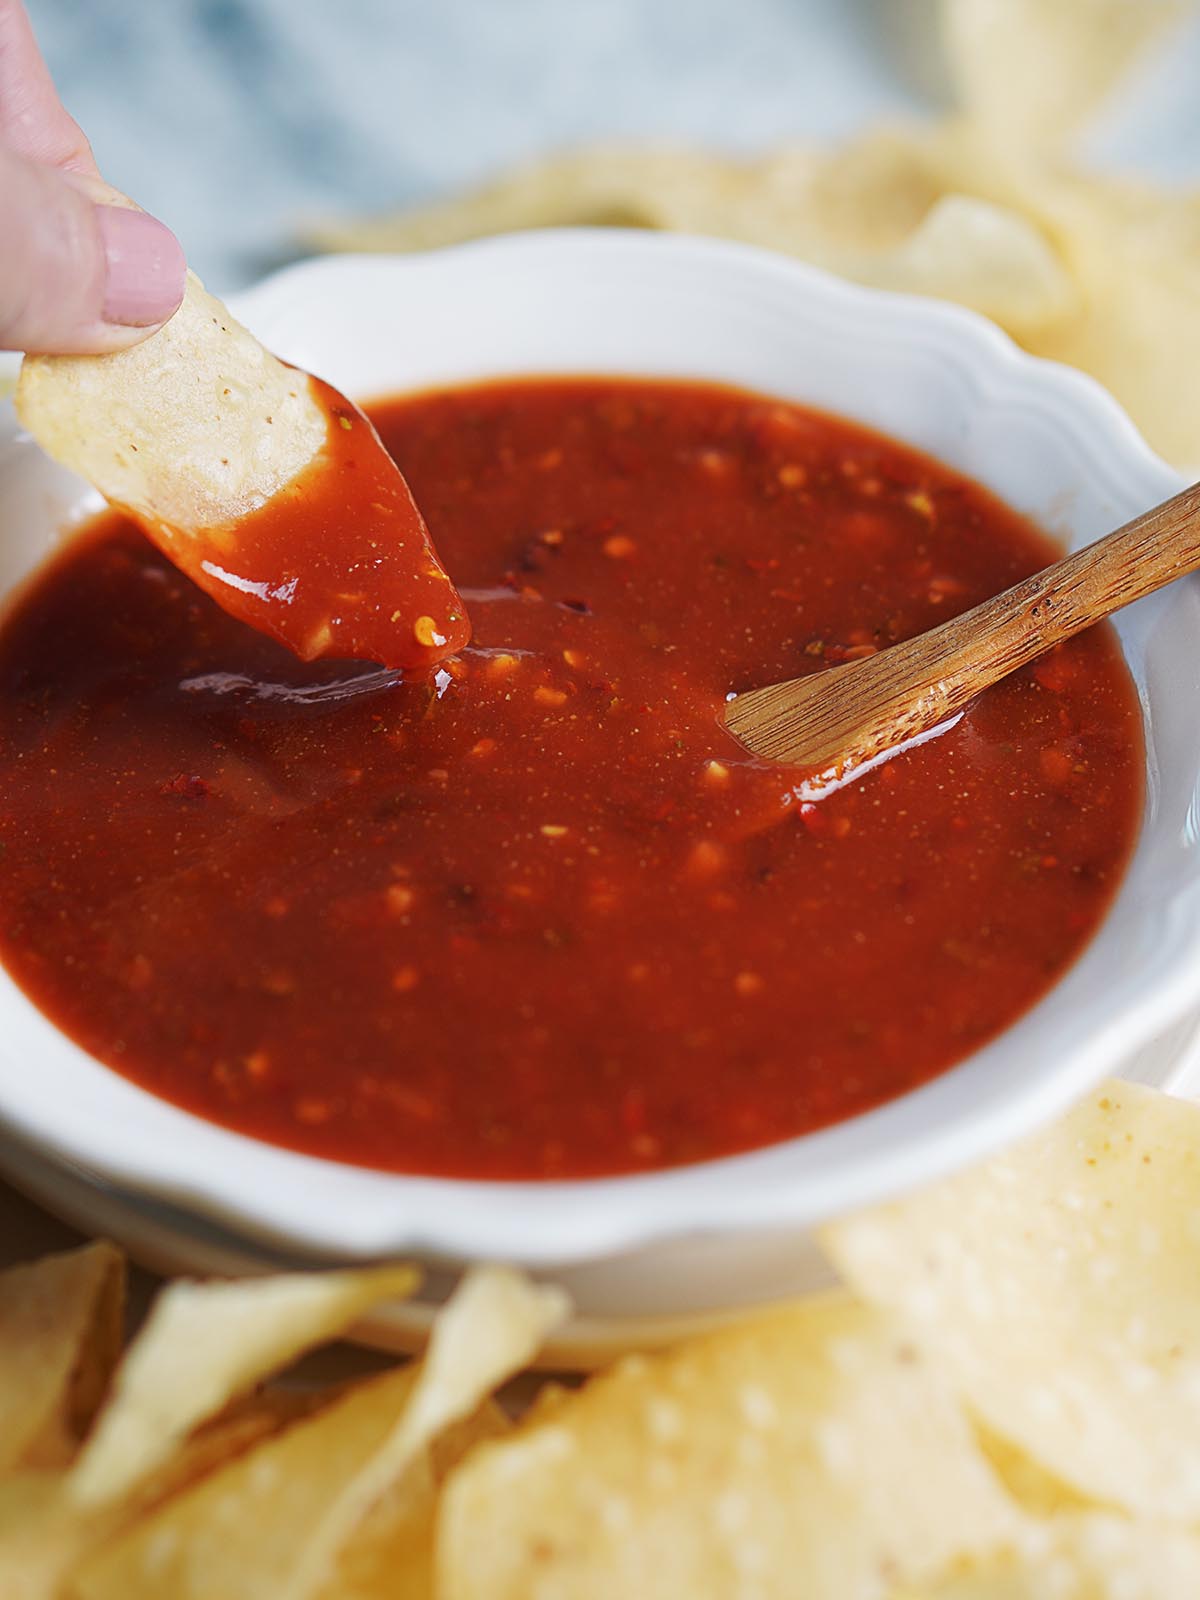 A hand holding a tortilla chip and dipping it into red sauce.